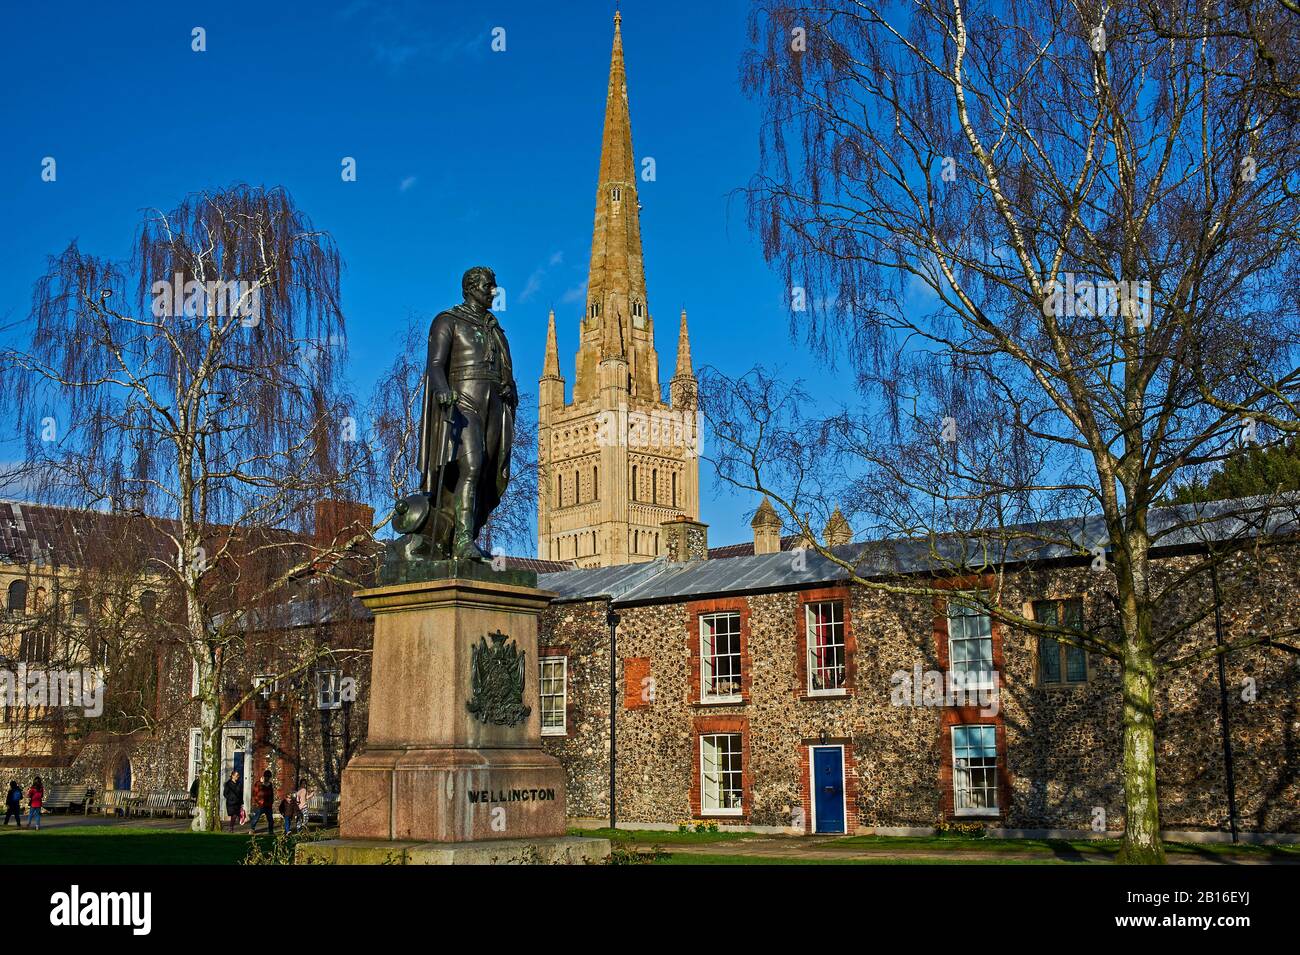 Statue of the Duke of Wellington stands in the grounds of Norwich Cathedral, Norwich, Norfolk, and overlooked by the 96m spire. Stock Photo